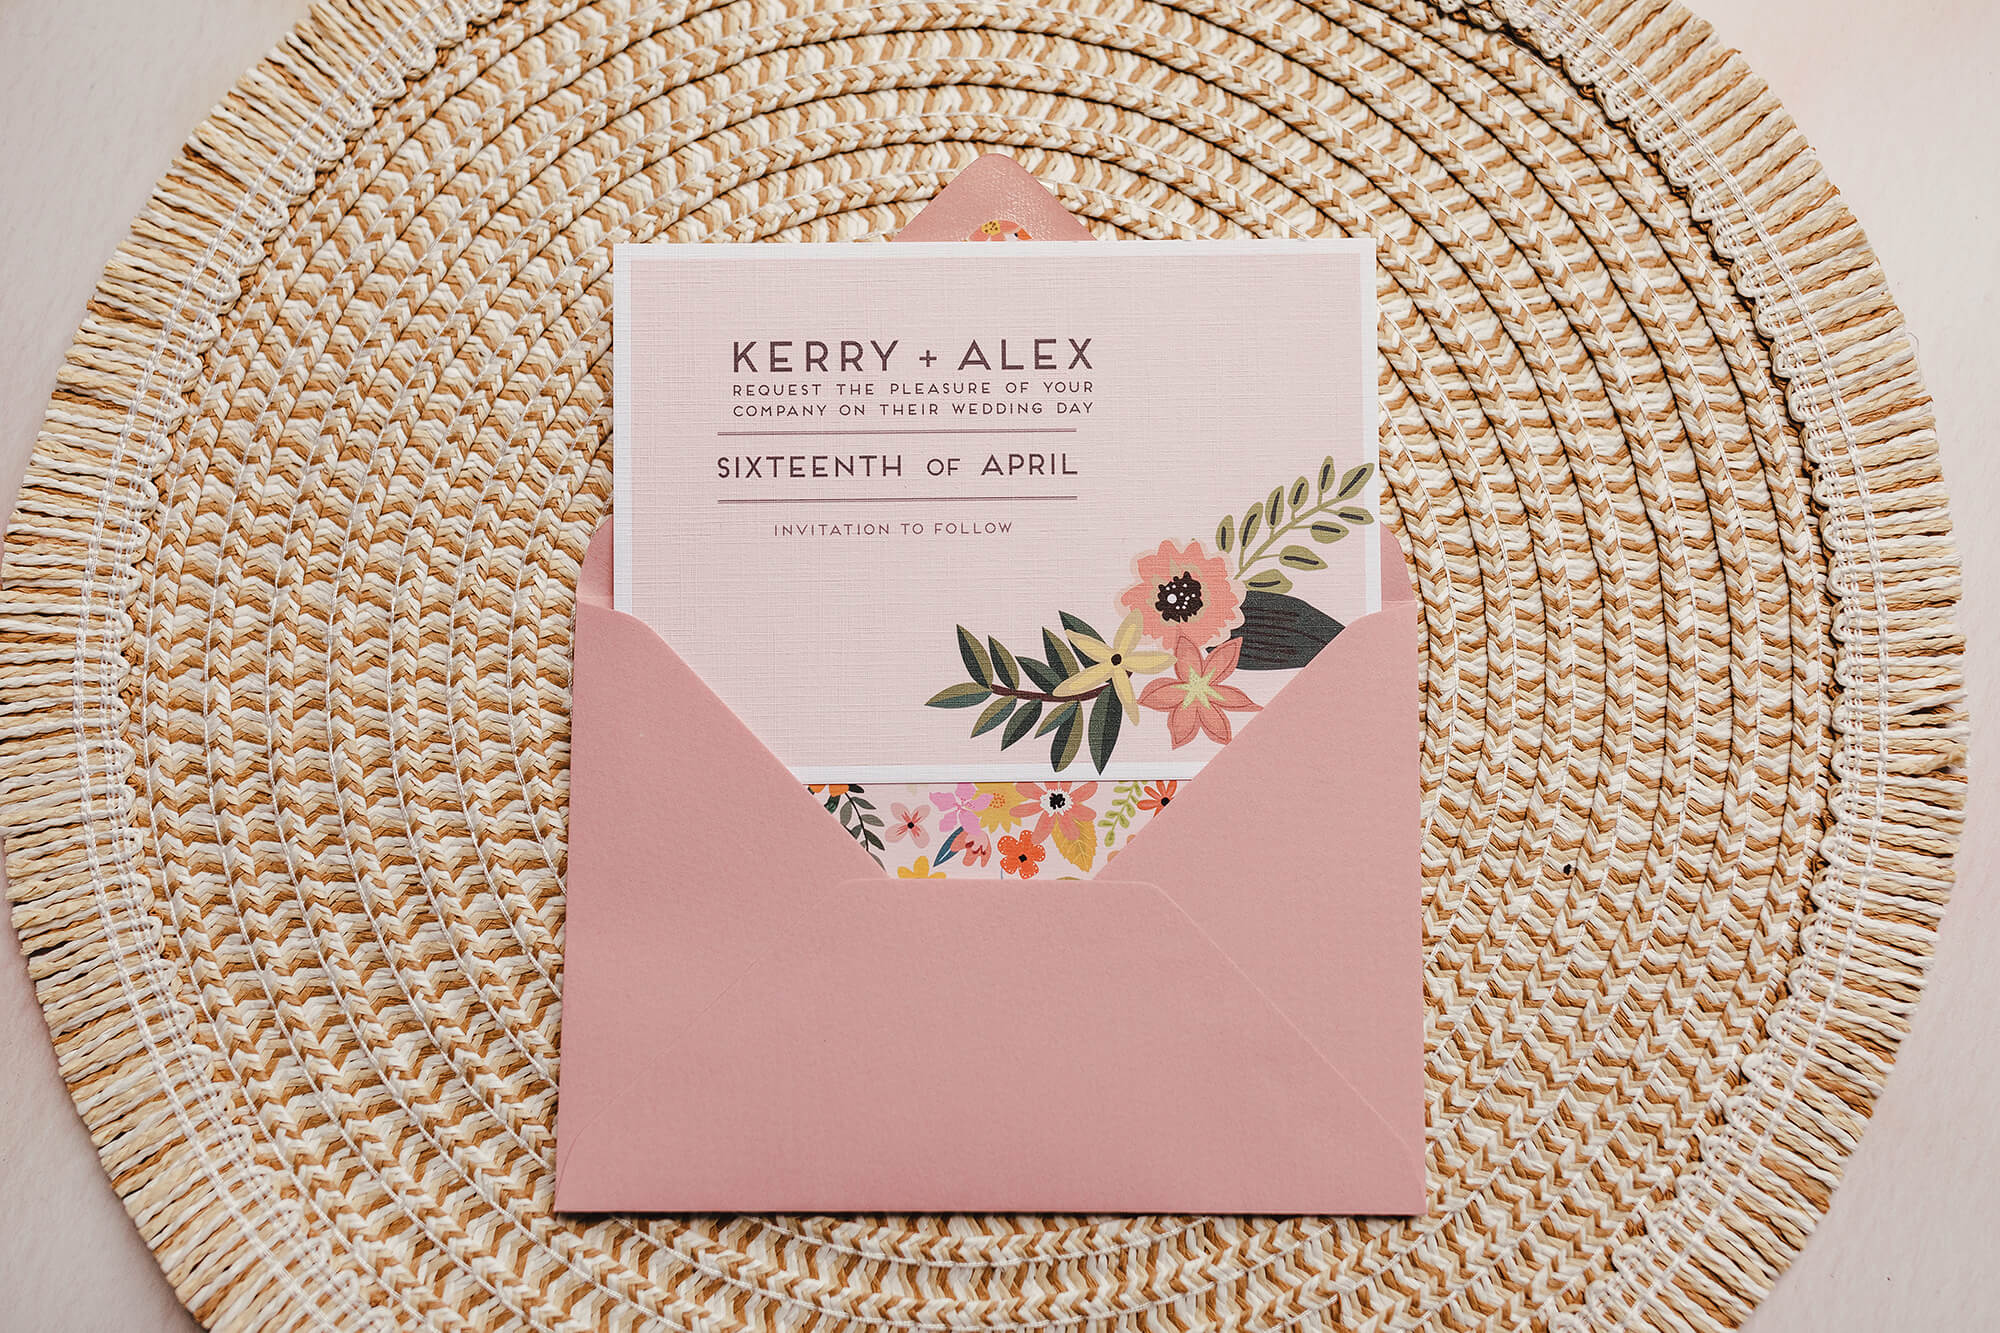 Floral, rustic save the date